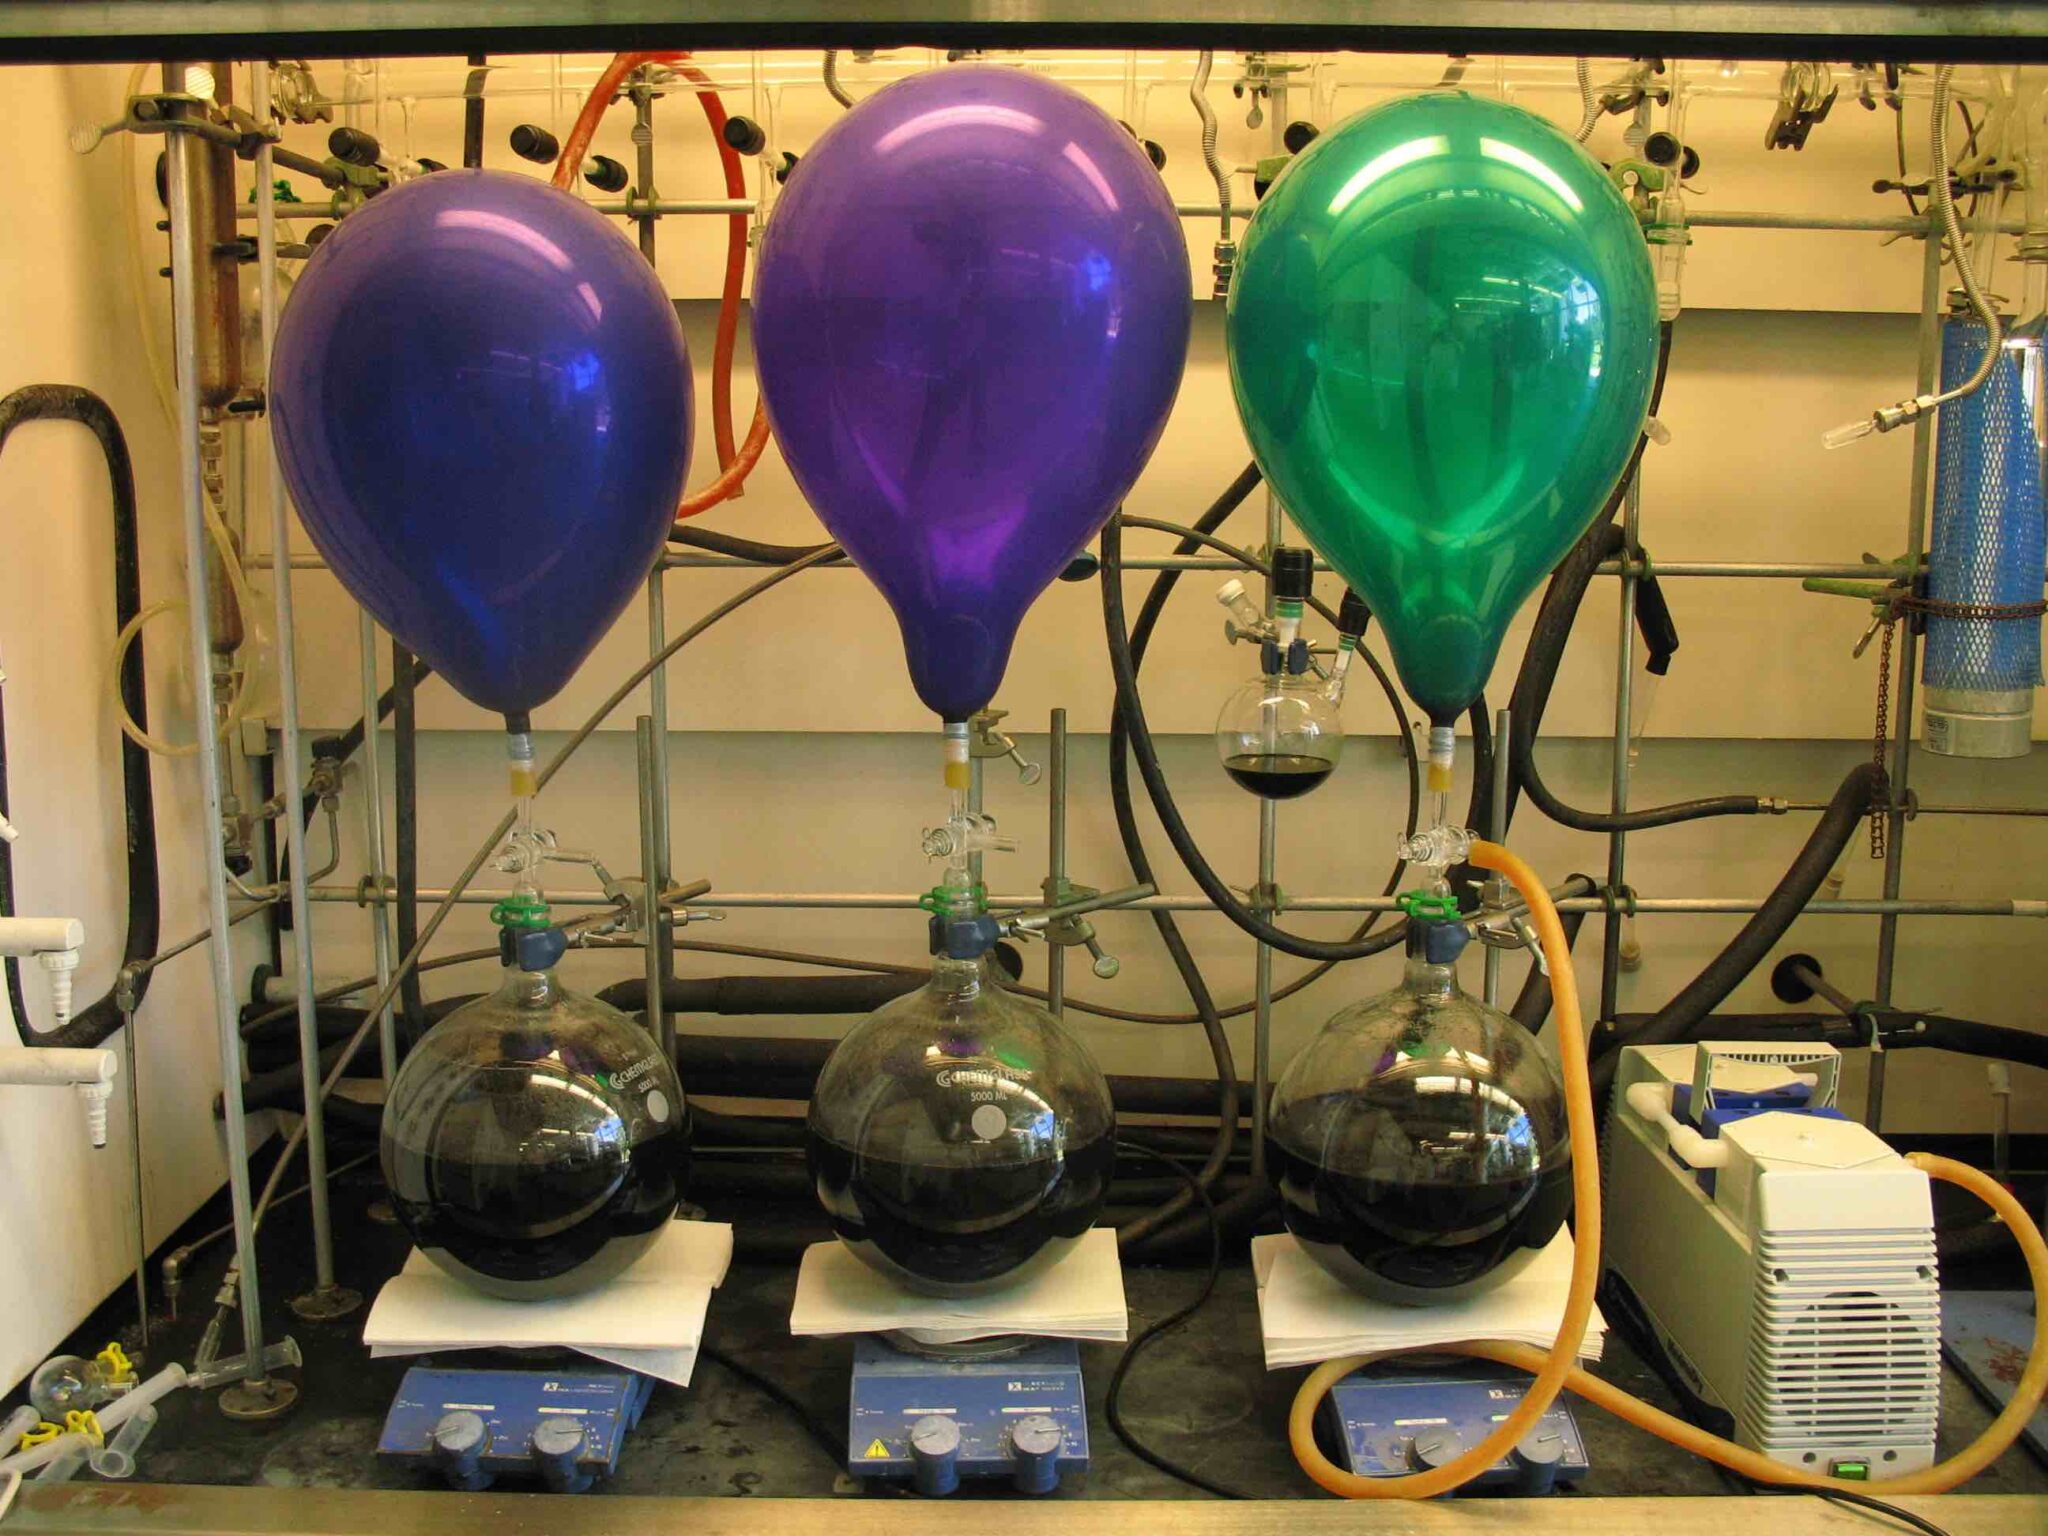 hydrogenation using balloon atmosphere carried out on large scale credit to org prep daily